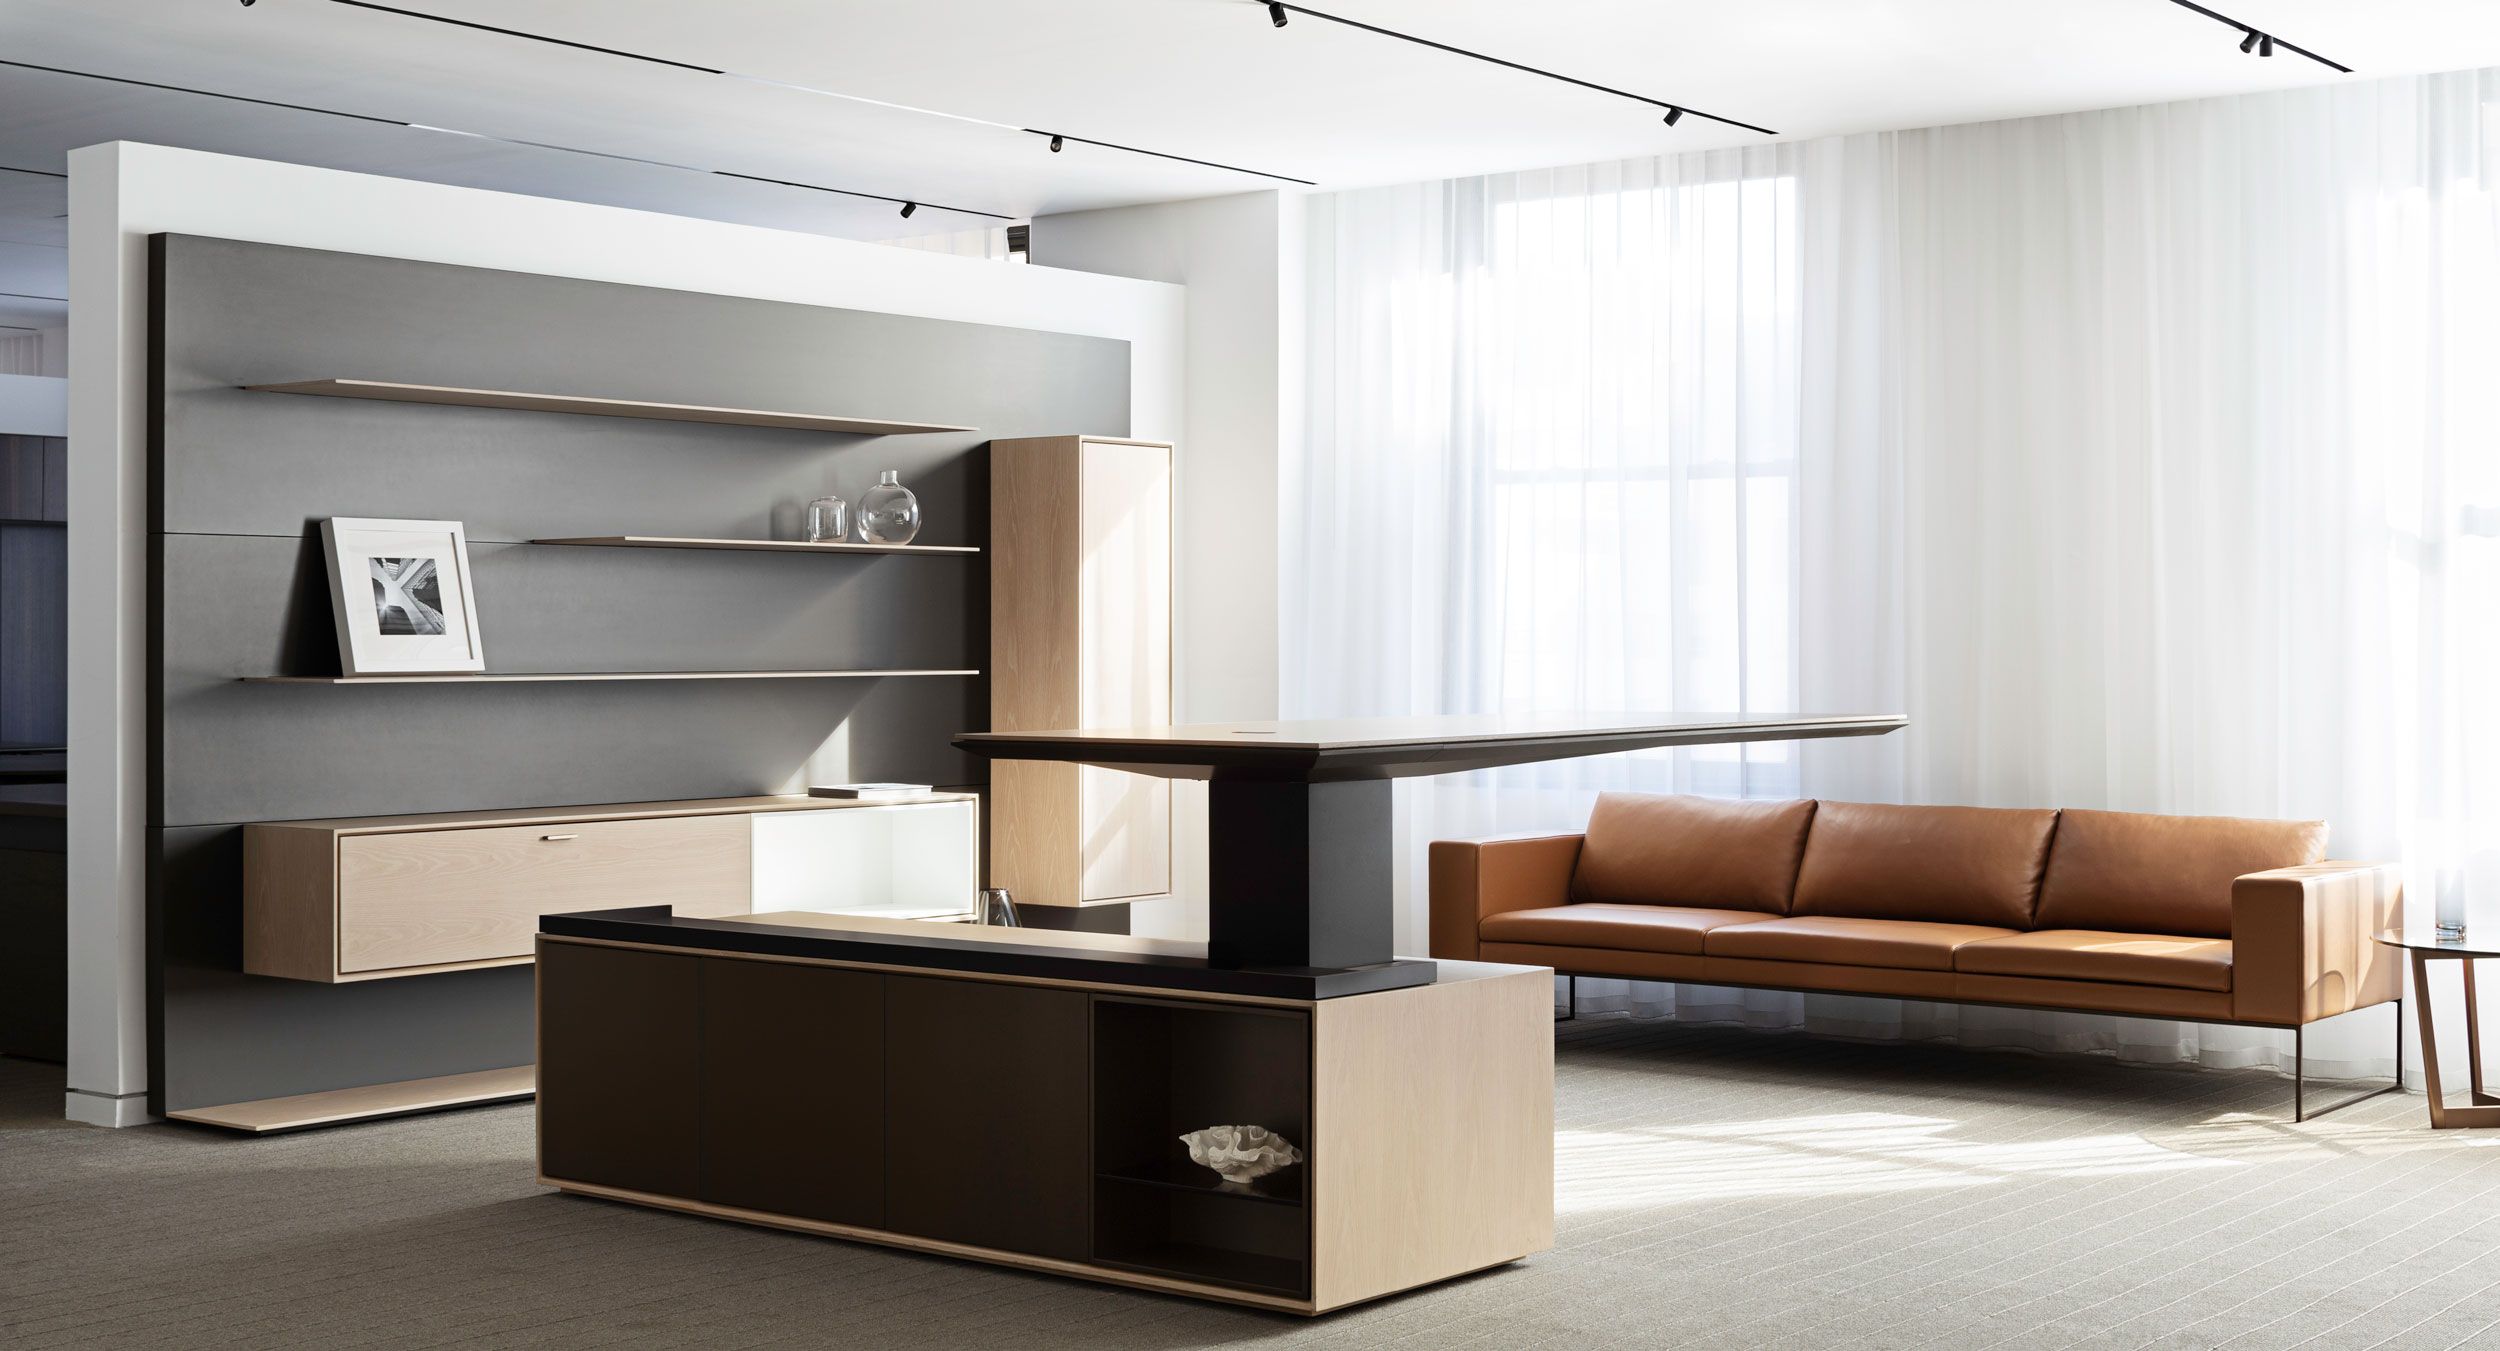 Defy gravity with the Halo cantilever adjustable-height desk.